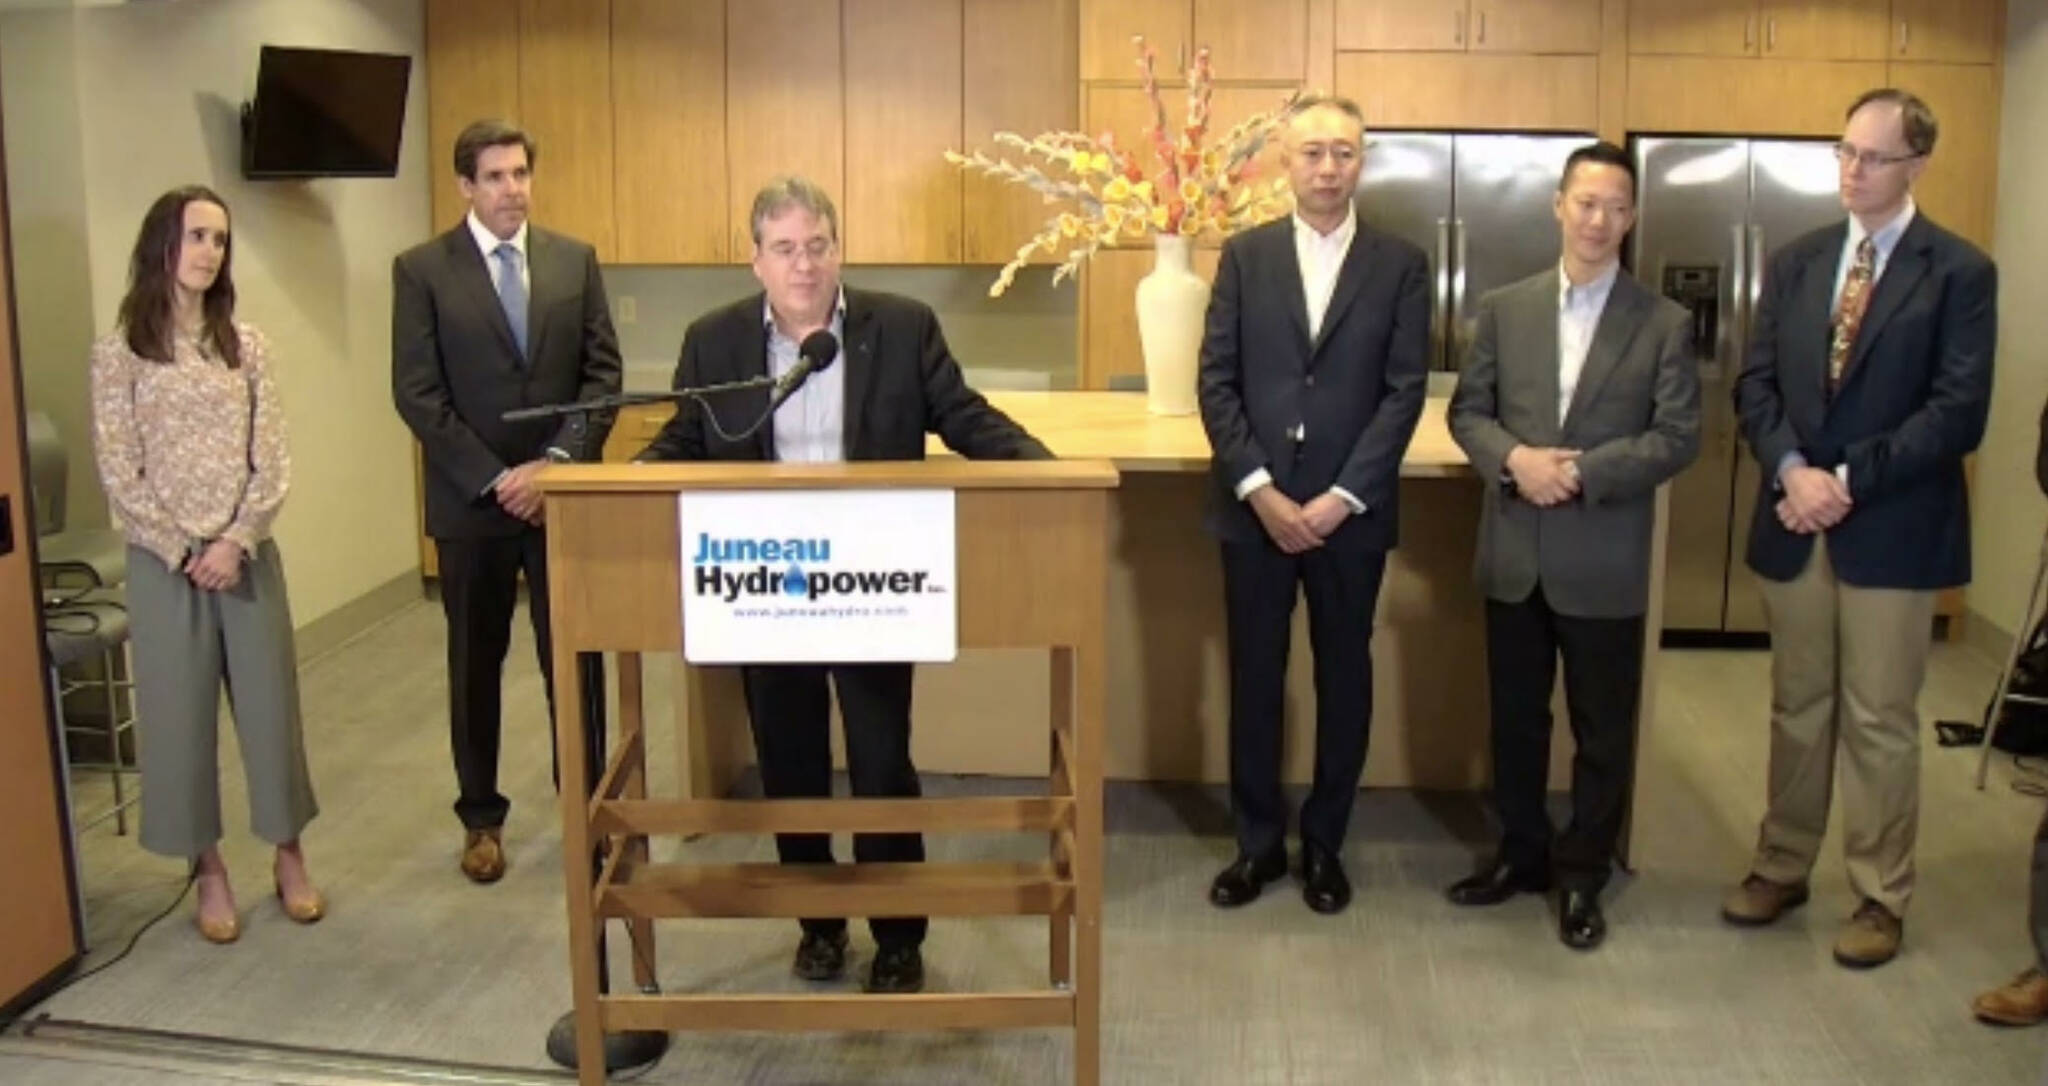 Duff Mitchell, managing director of Juneau Hydropower announced Juneau Hydropower’s joint development agreement to construct Sweetheart Lake Hydroelectric Plant with the Tokyo-based developer JPOWER during a Thursday afternoon Zoom news conference, which included an appearance by Gov. Mike Dunleavy, a Republican, and other officials as a part of the project. (Screenshot)